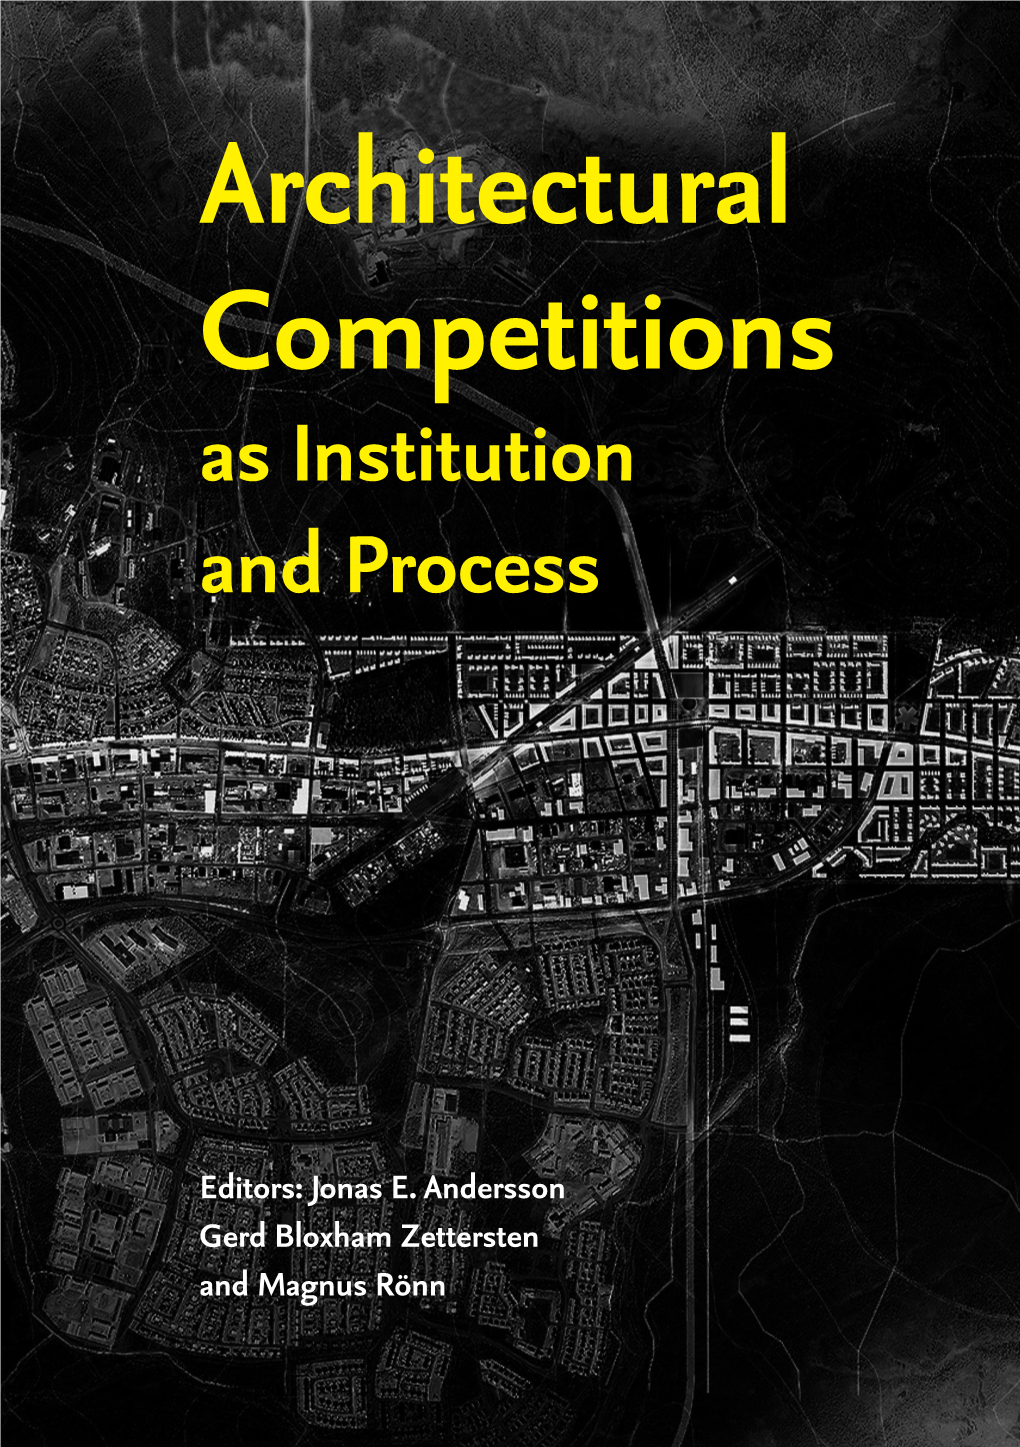 Architectural Competitions of Architectural Knowledge by Design in a Future-Oriented Context